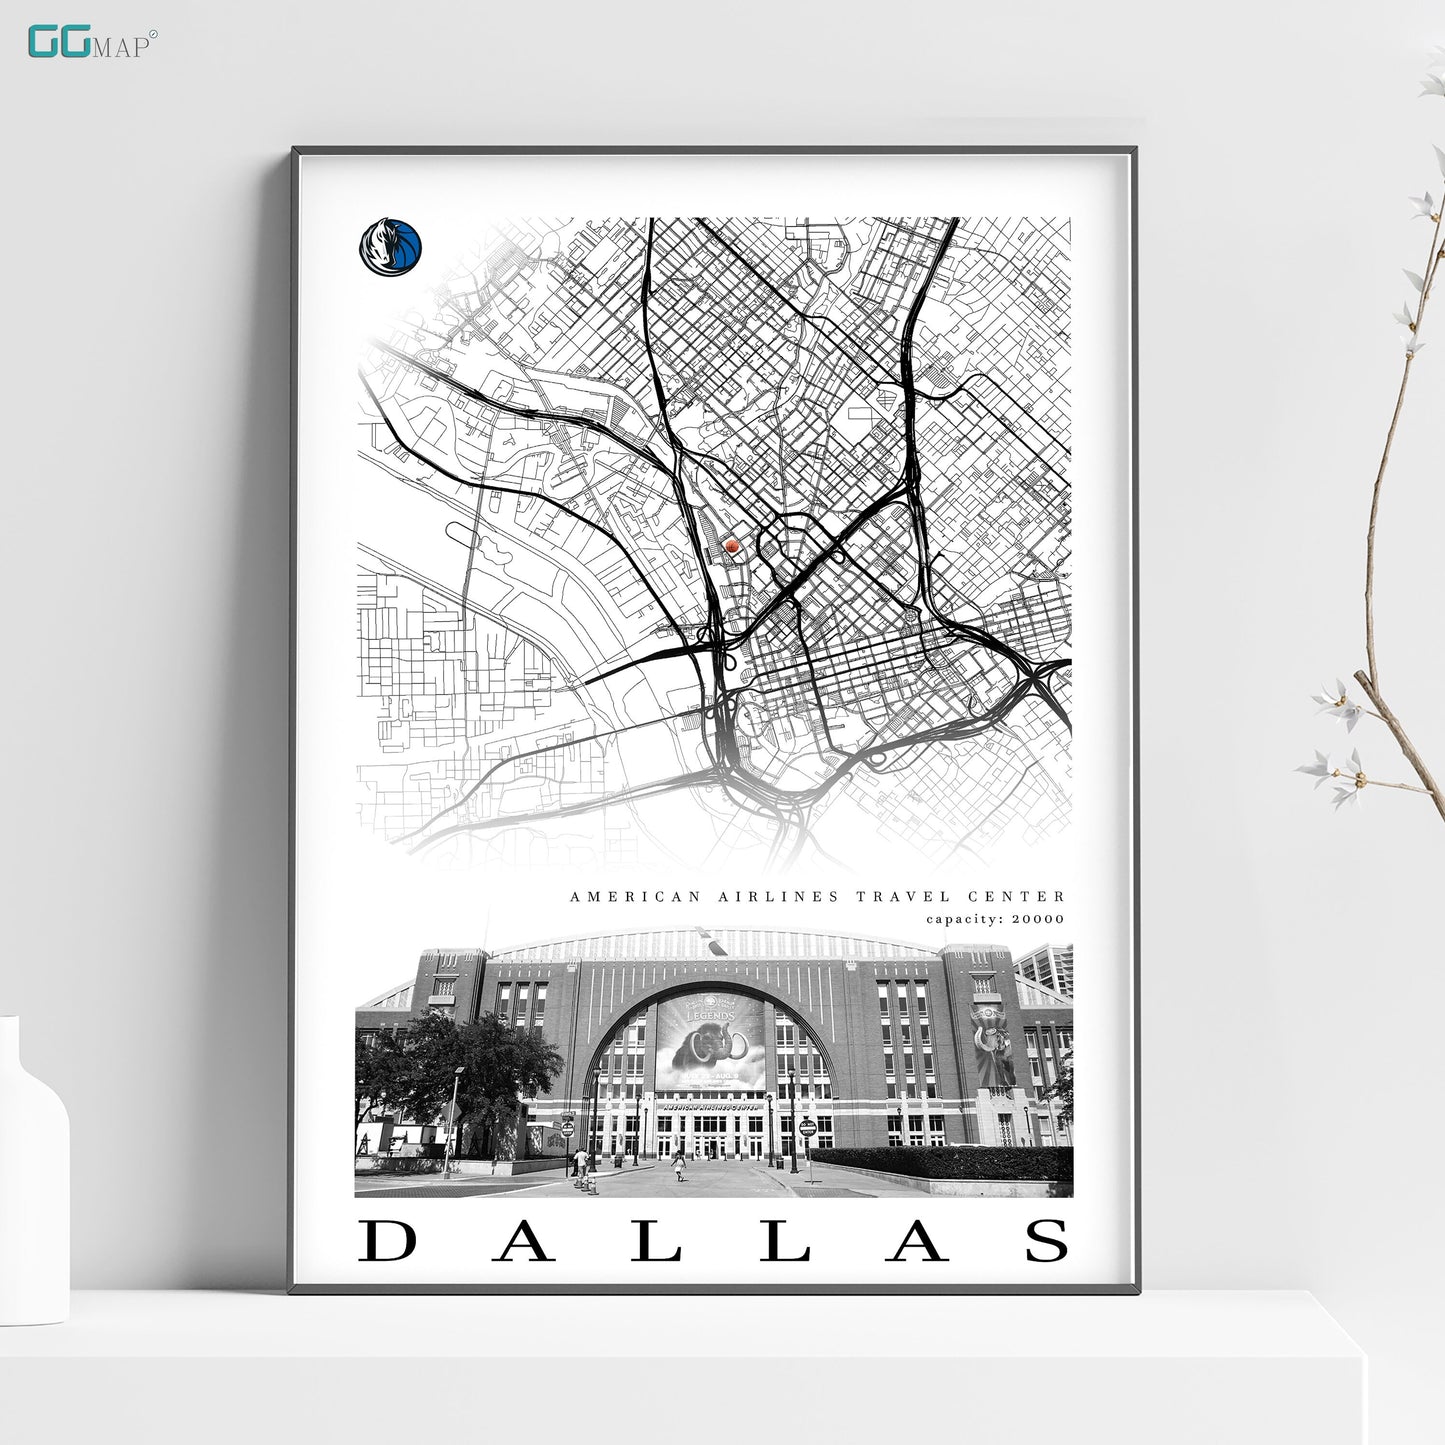 City map of DALLAS - American Airlines Travel Center - Home Decor Dallas - Dallas wall decor - Dallas poster - Dallas gift - Print map